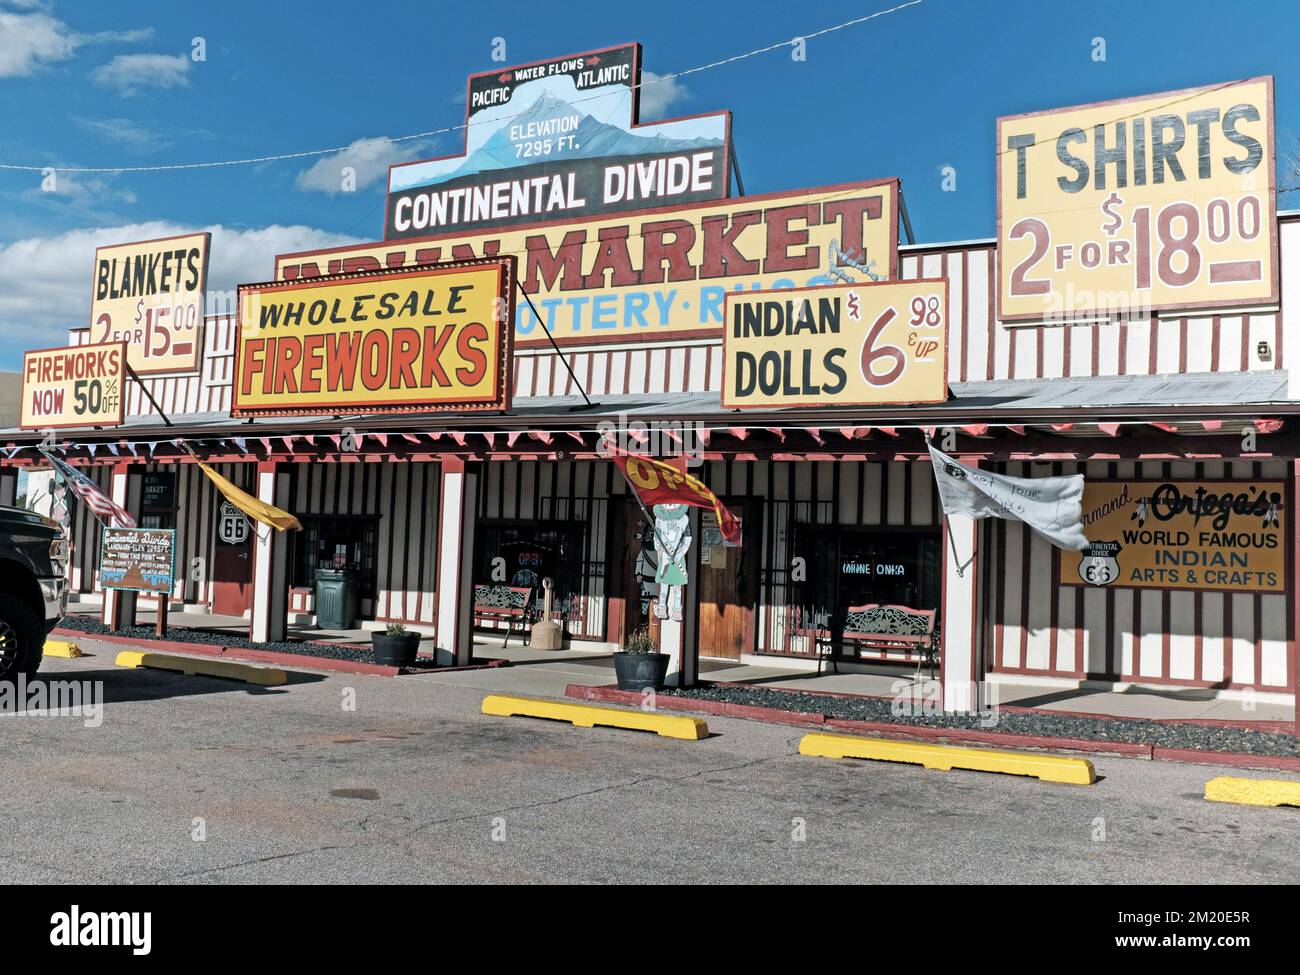 The Continental Divide Ortega's Indian Market an der Route 66 in Continental Divide, New Mexico, am 13. November 2022. Stockfoto